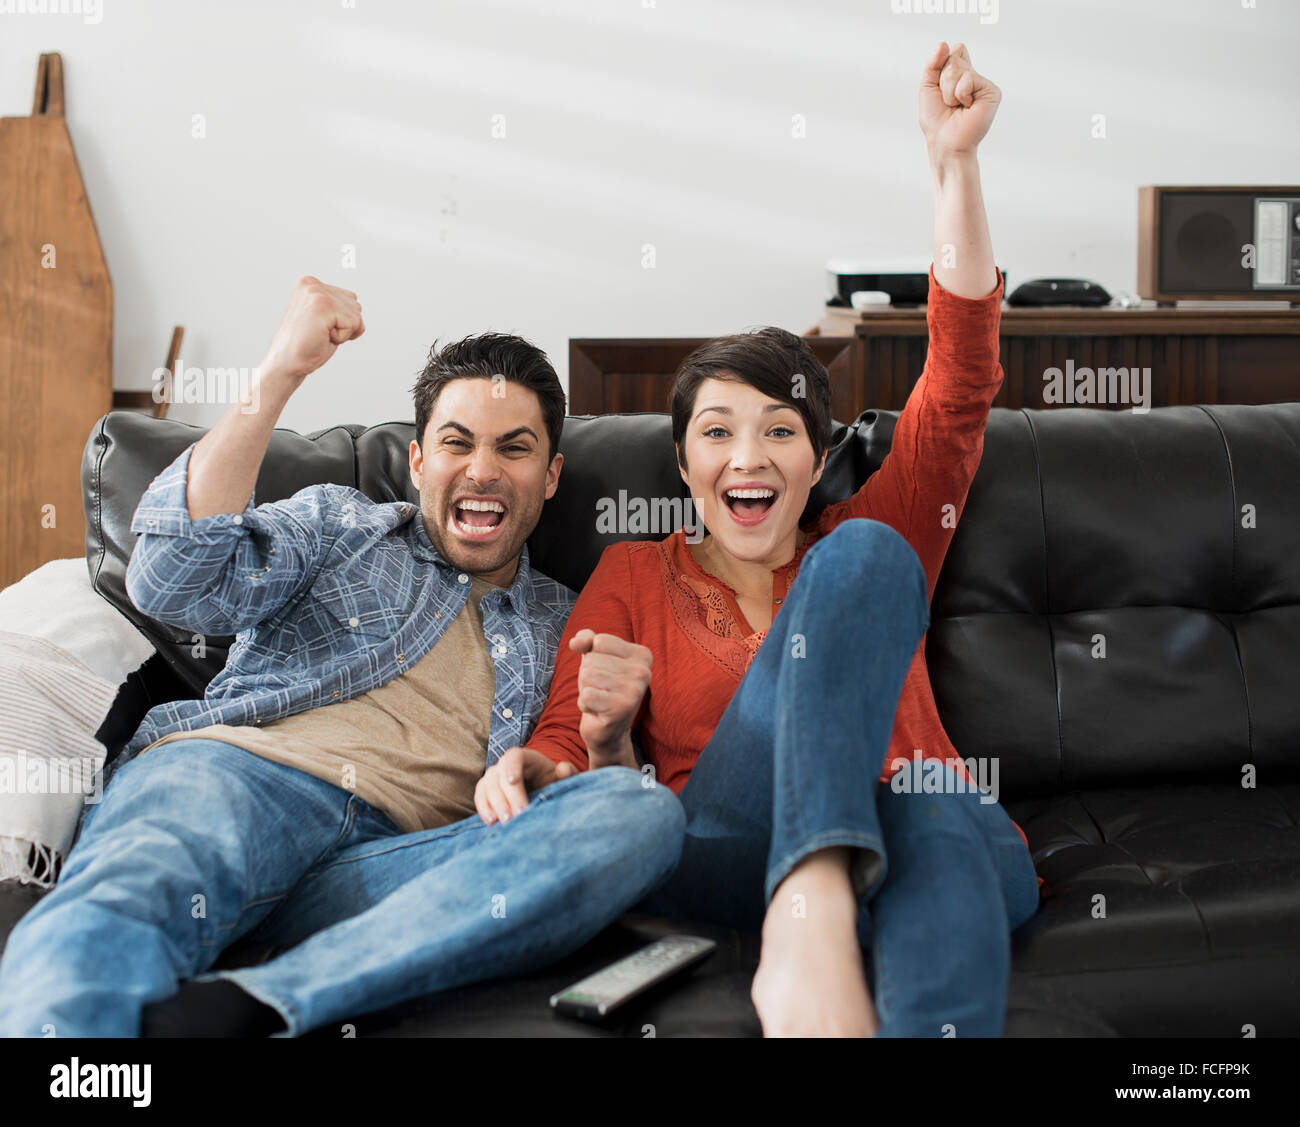 A man and woman sitting on a sofa, celebrating and pumping the air with their fists. Watching sport on the tv. Stock Photo